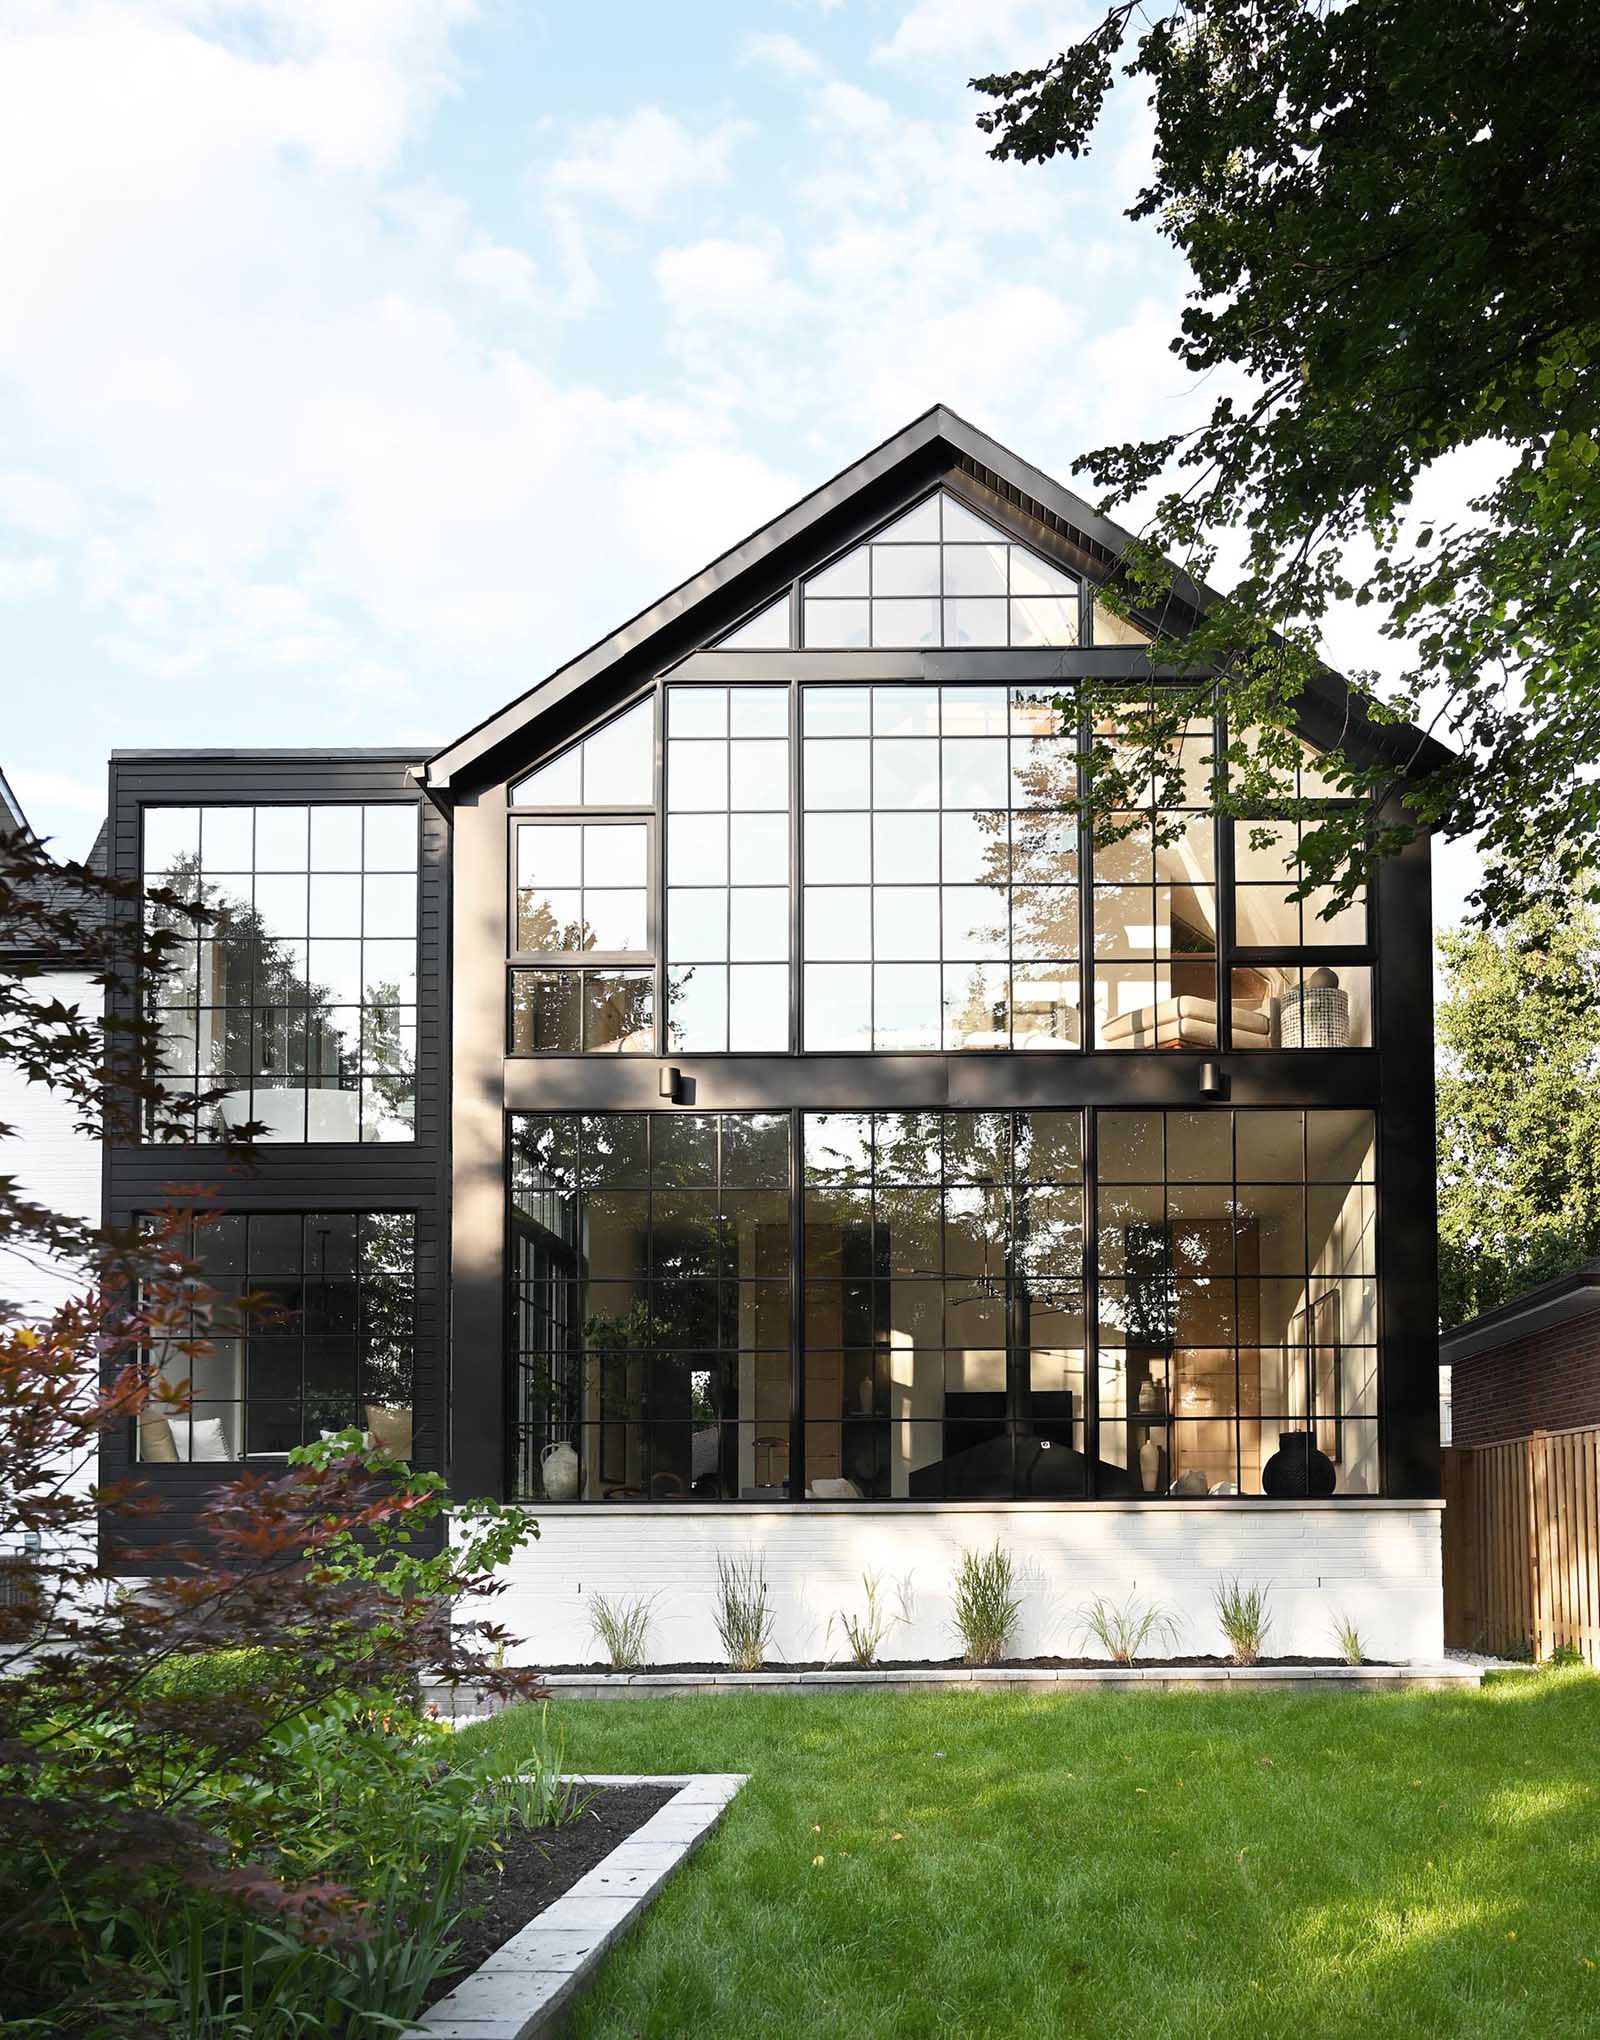 This contemporary home includes a back wall made up of large format loft style windows which are a contrast to the crisp material palette found throughout the home.